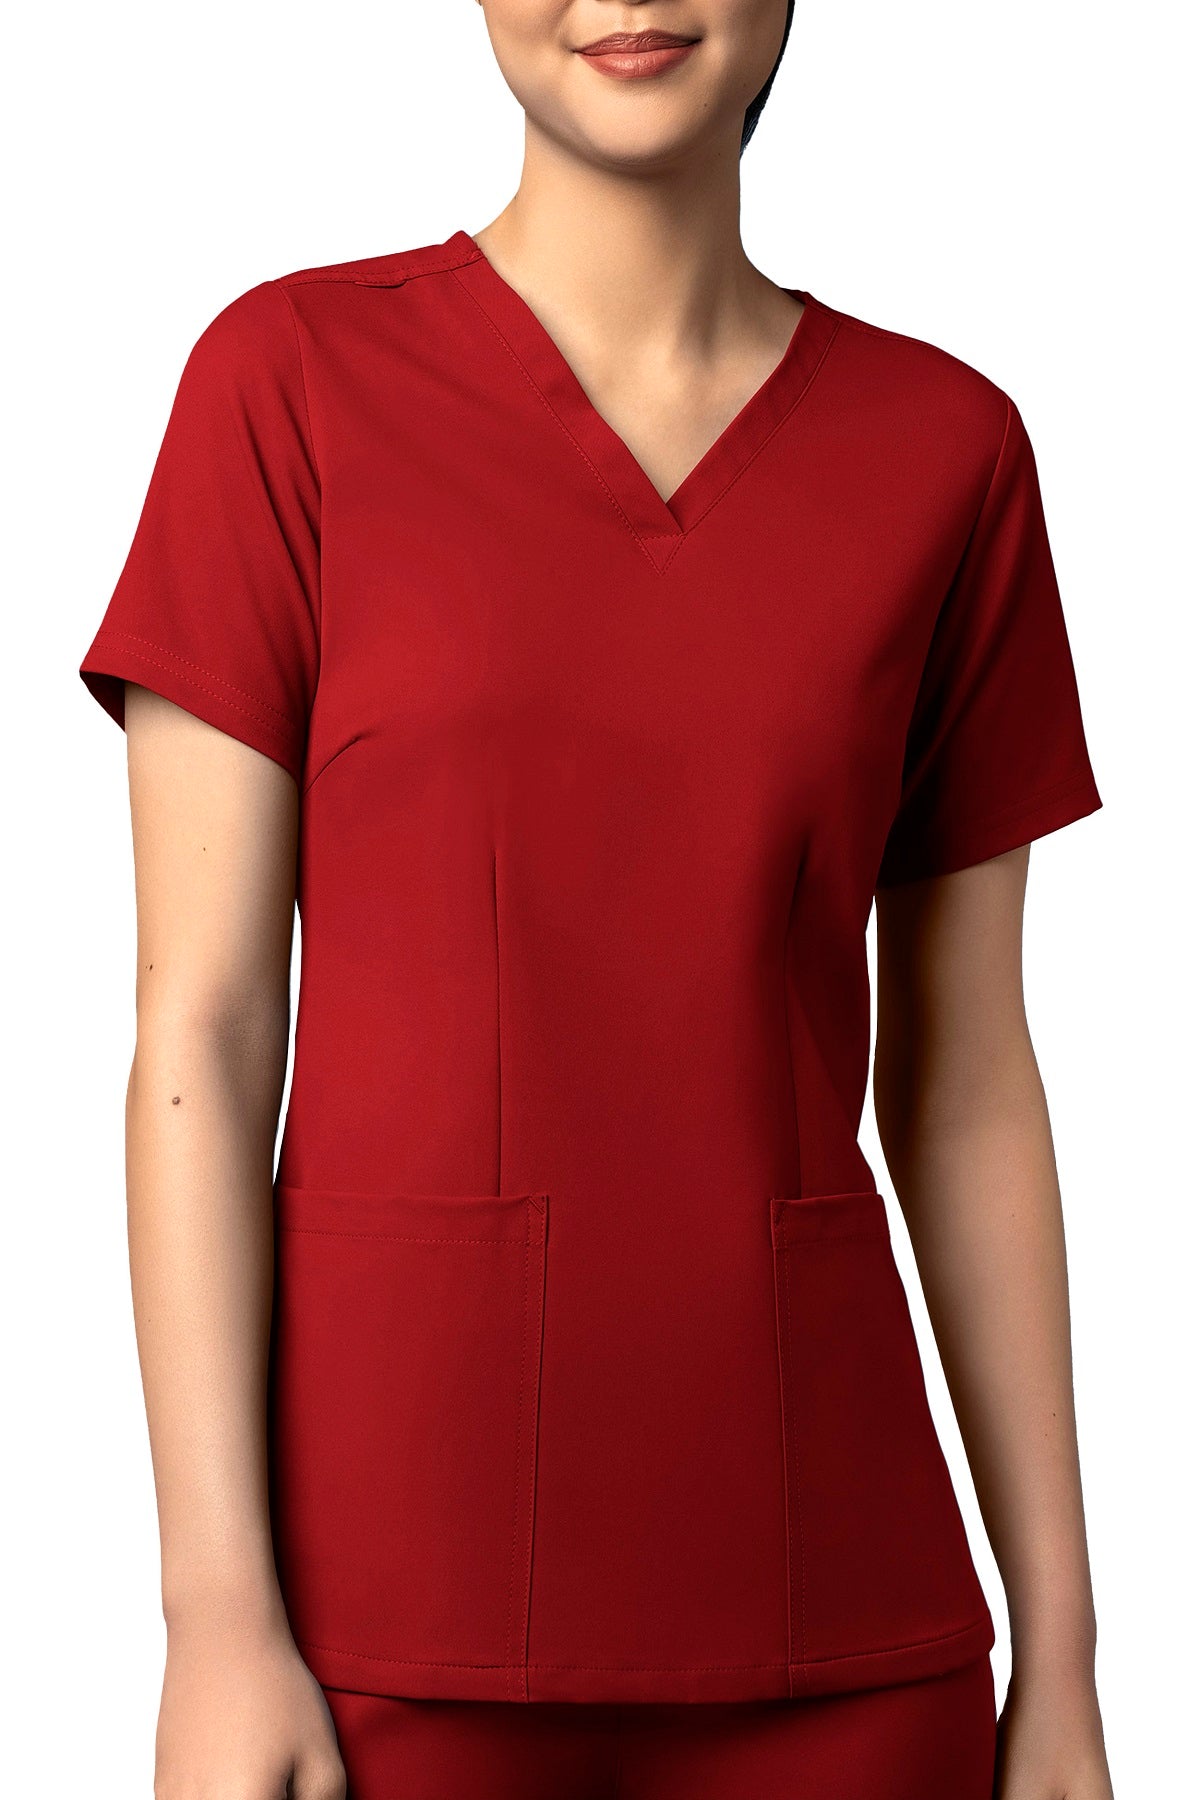 WonderWink Scrub Top Thrive Fitted 3-Pocket in burgundy at Parker's Clothing and Shoes.